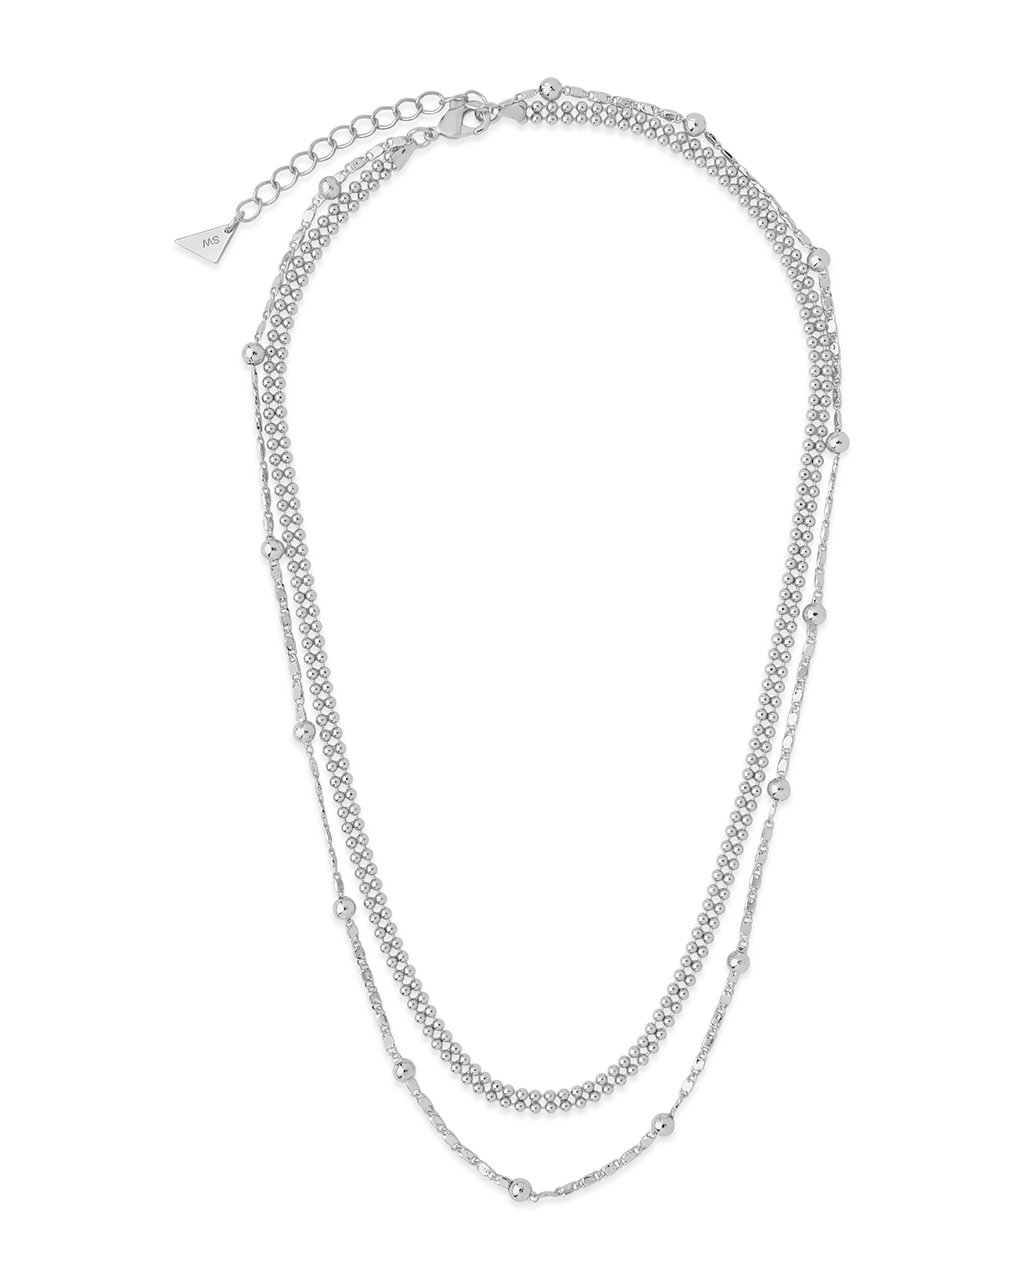 Layered Beaded Chain Necklace Necklace Sterling Forever 